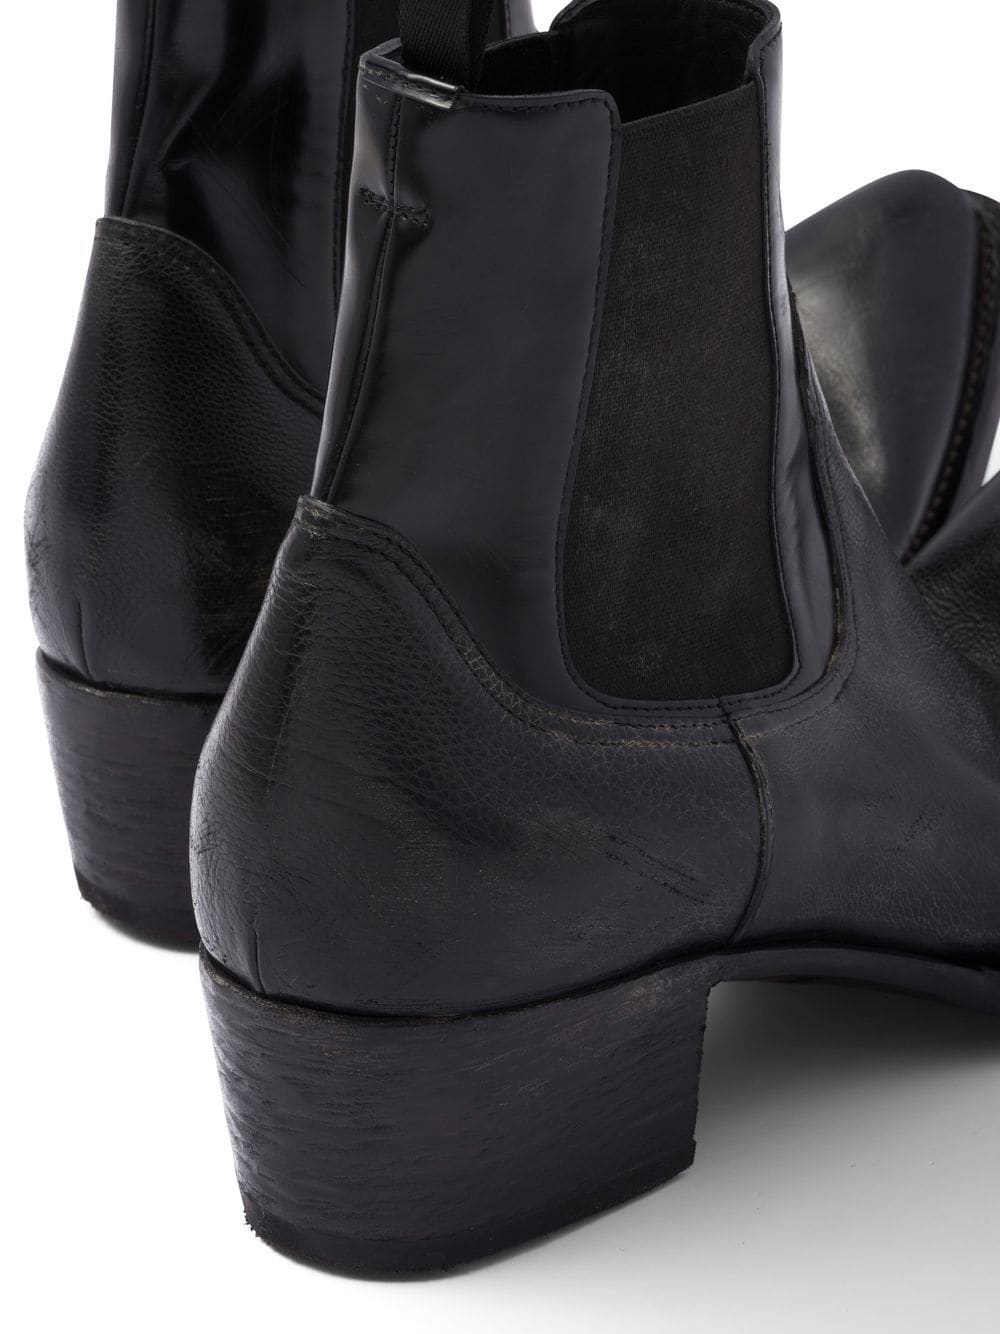 Prada turn-up Toe Leather Ankle Boots - Farfetch